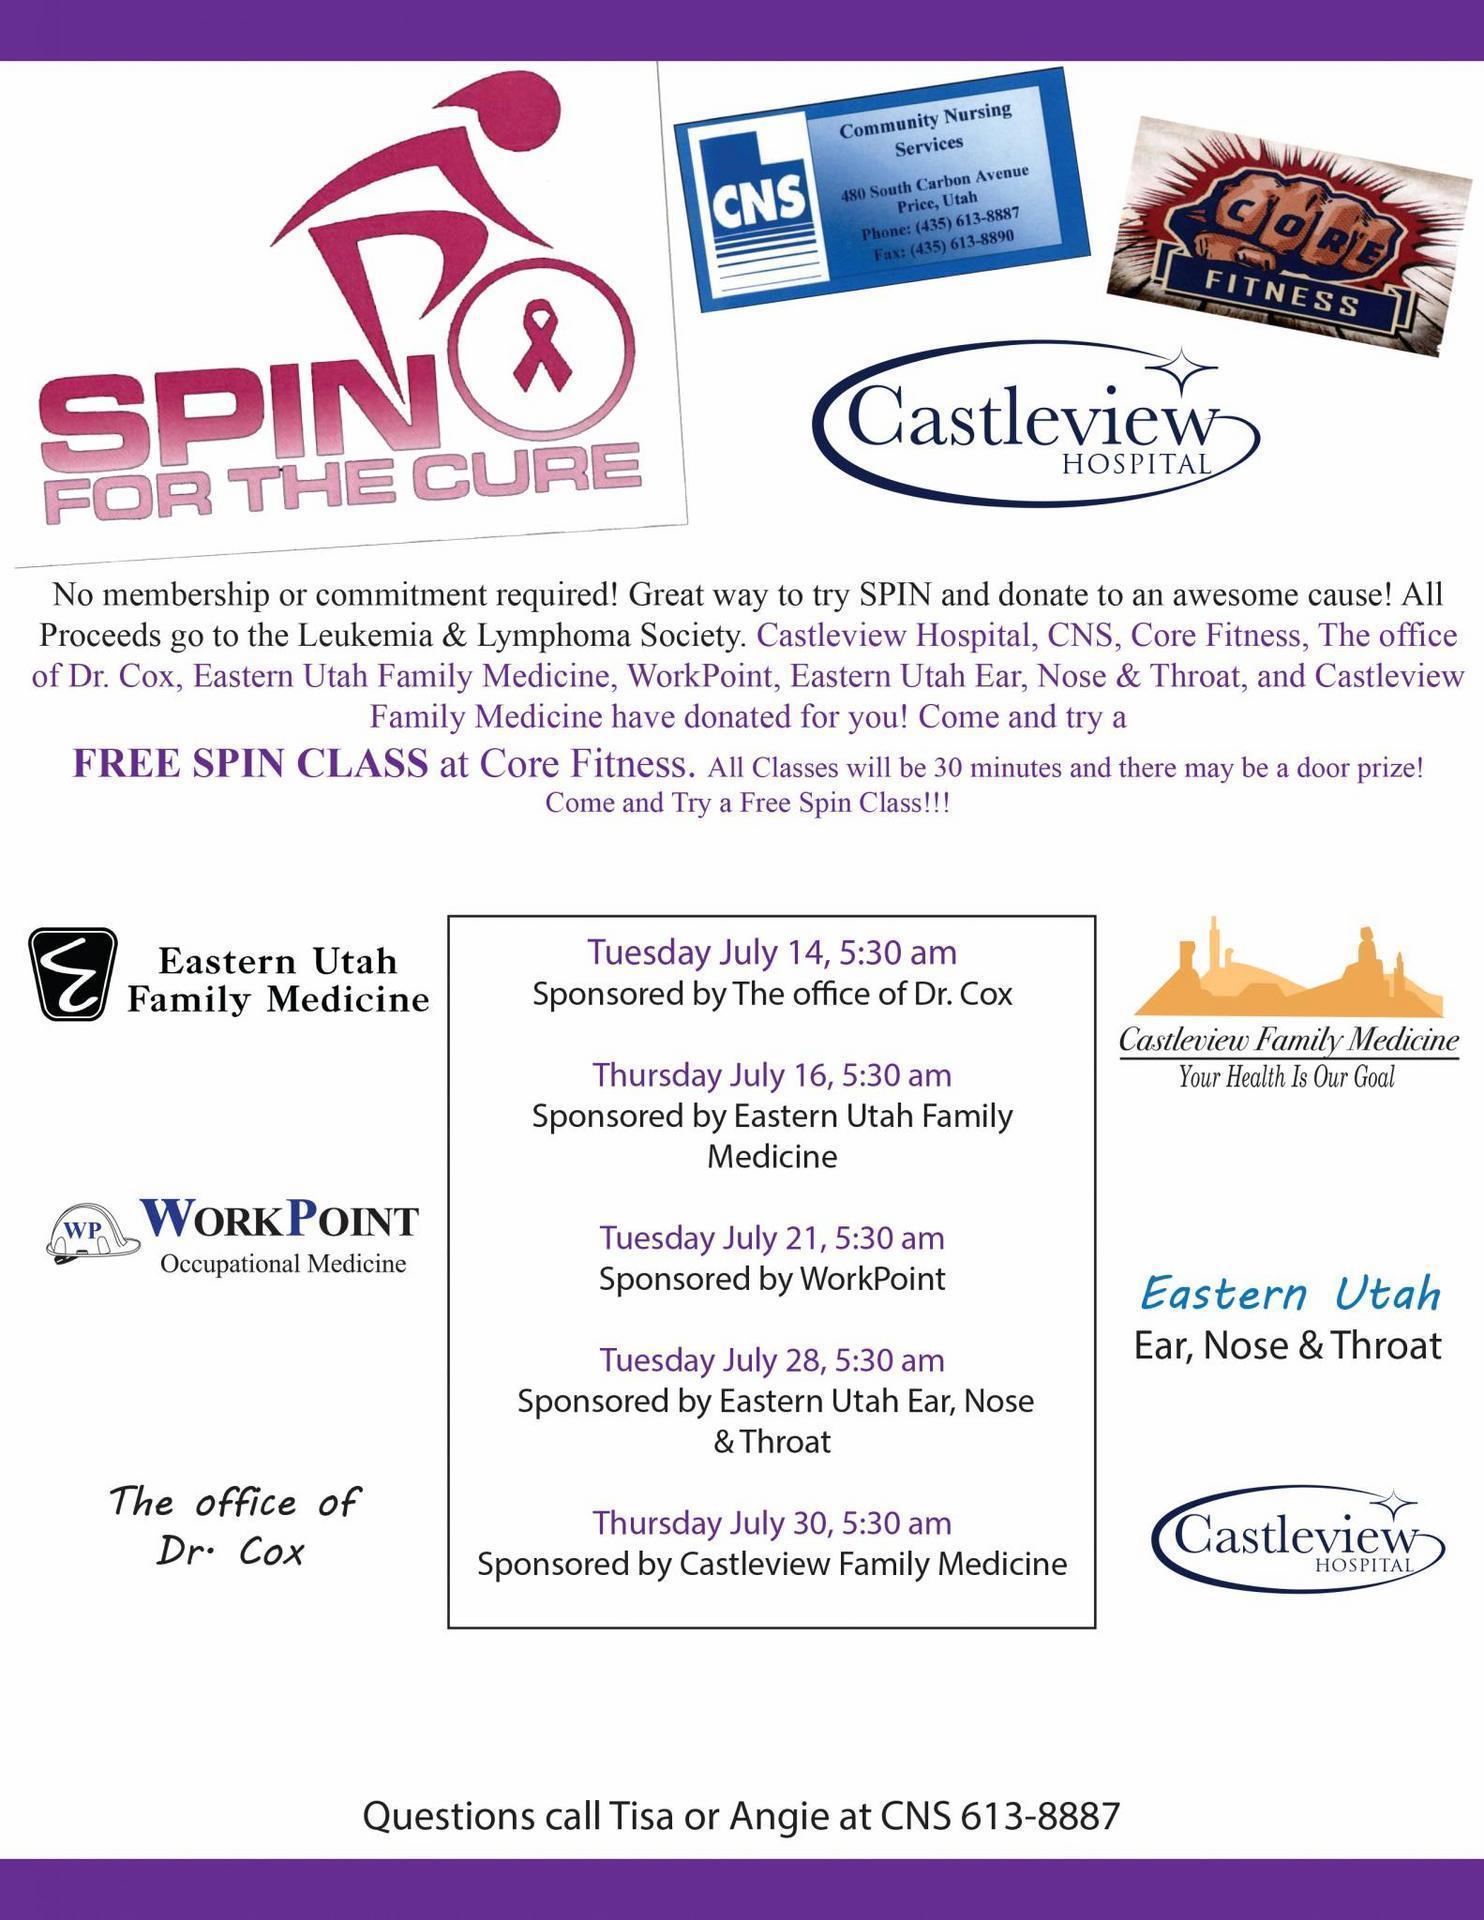 Spin-for-a-cure-flyer-LLS.jpeg